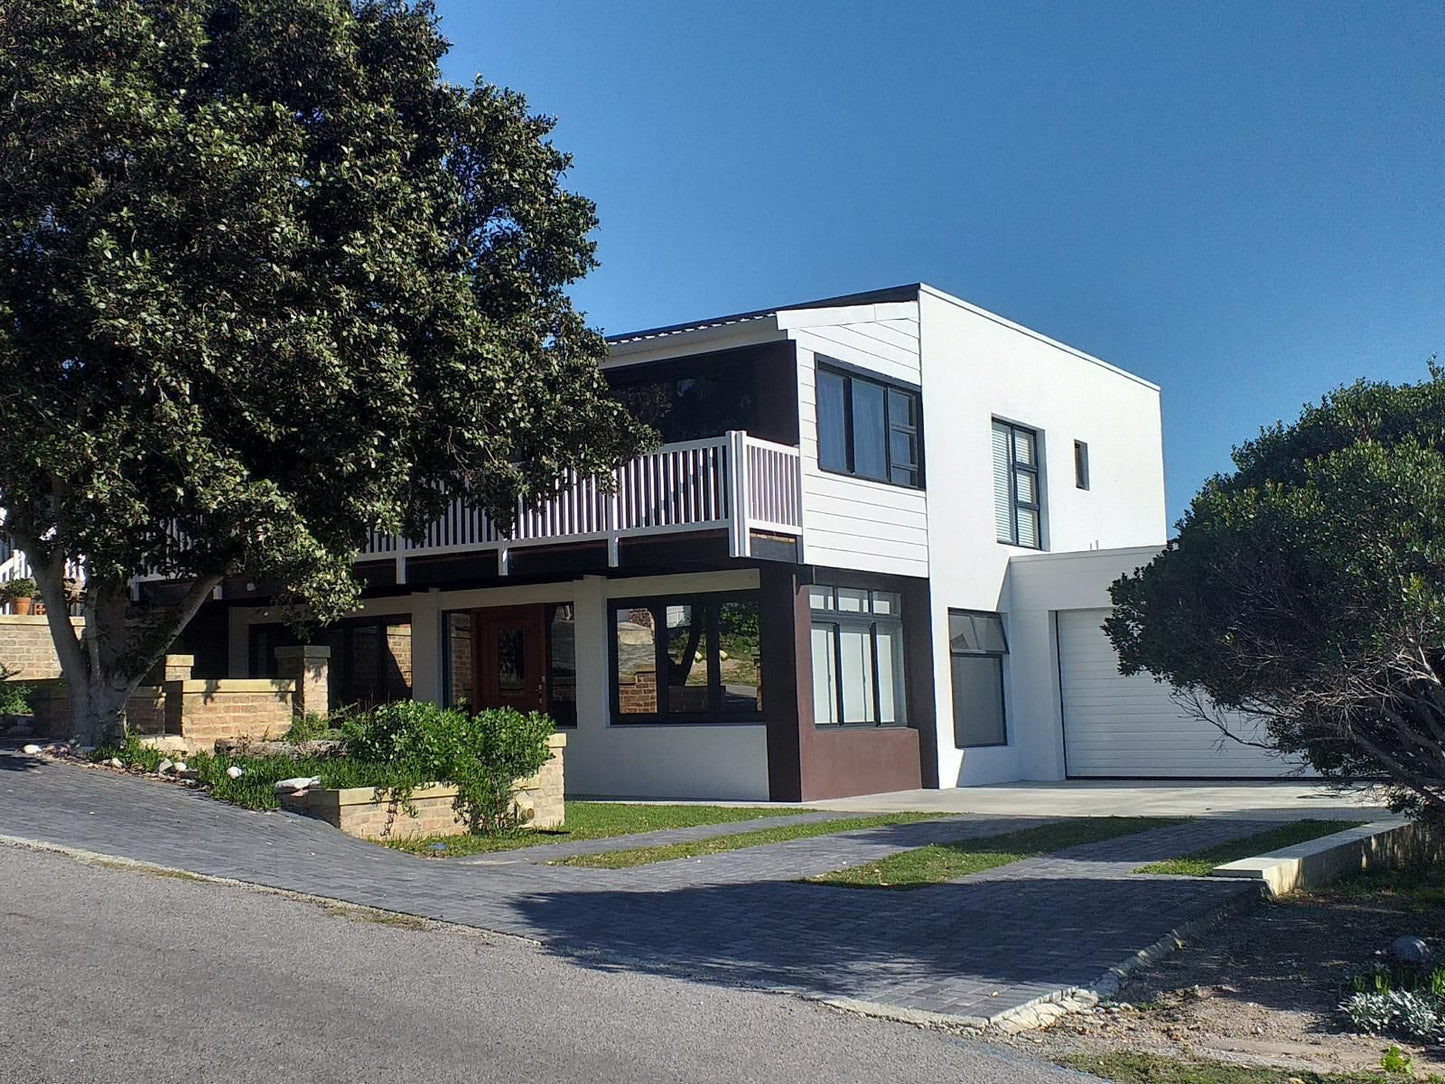 High Level Self Catering Lagulhas Agulhas Western Cape South Africa Building, Architecture, House